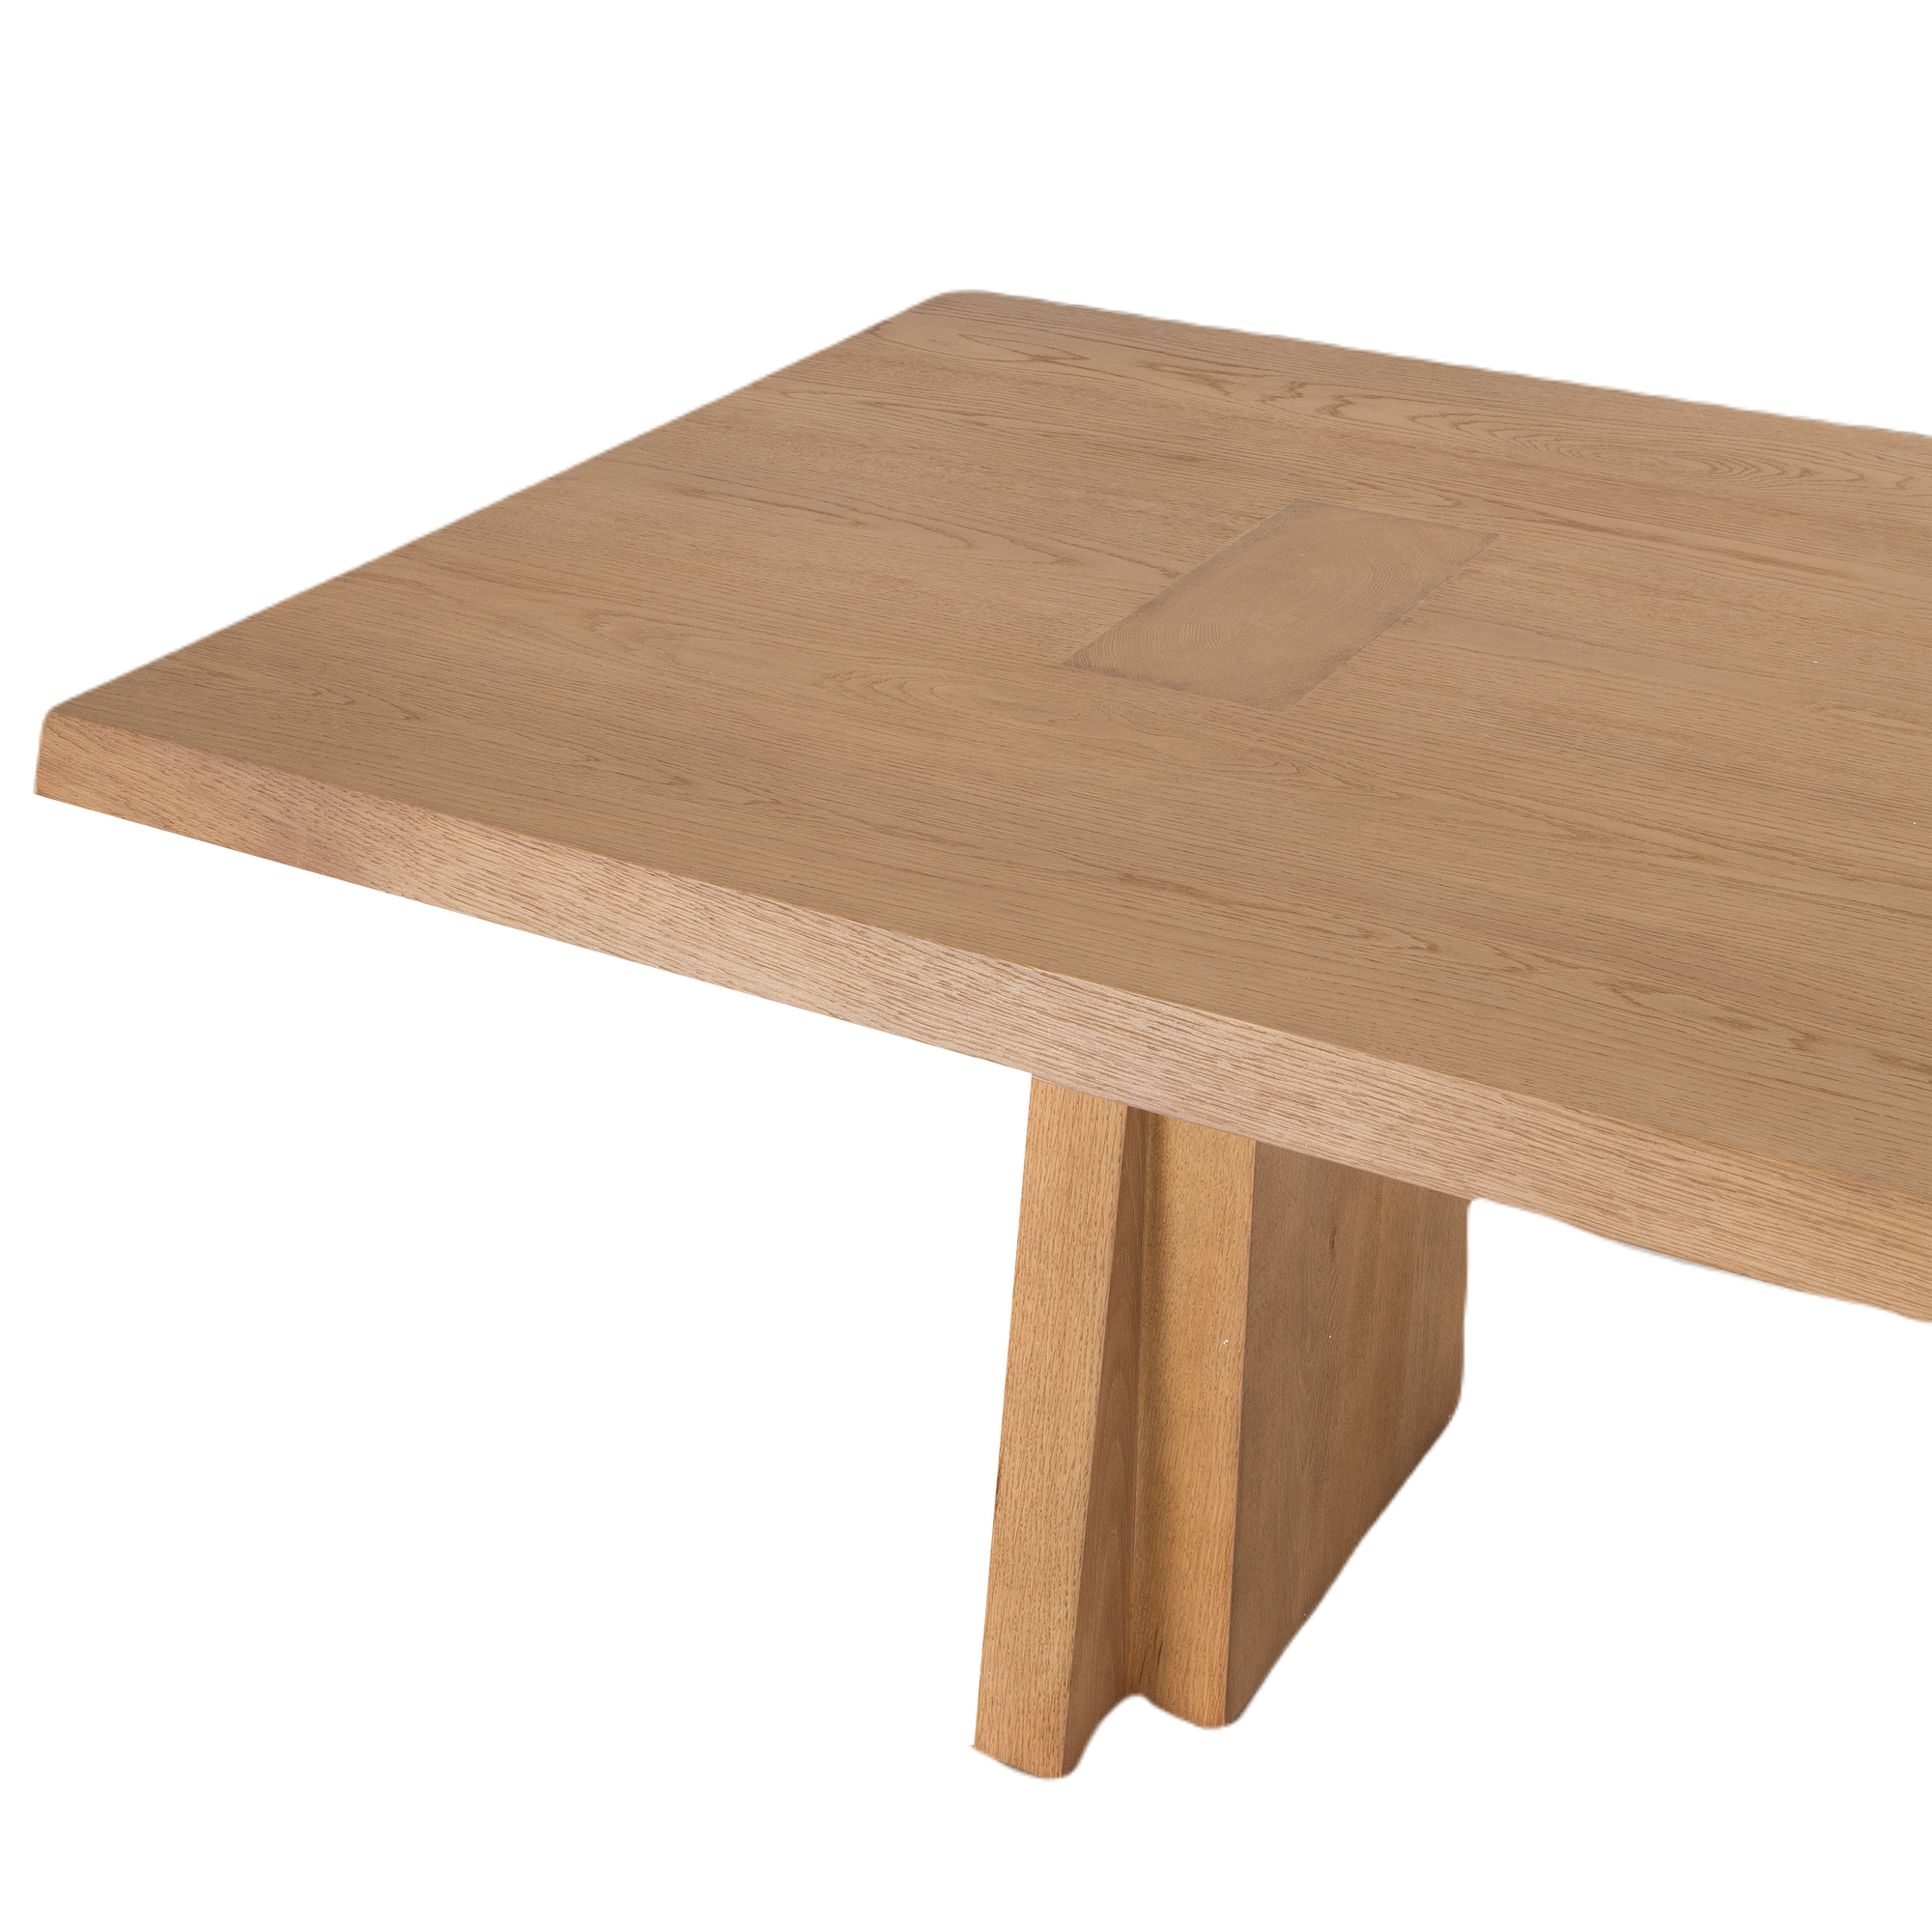 The Oblique Rectangular Dining Table draws inspiration from the raw power and geometric precision of 1960s Brutalist architecture.